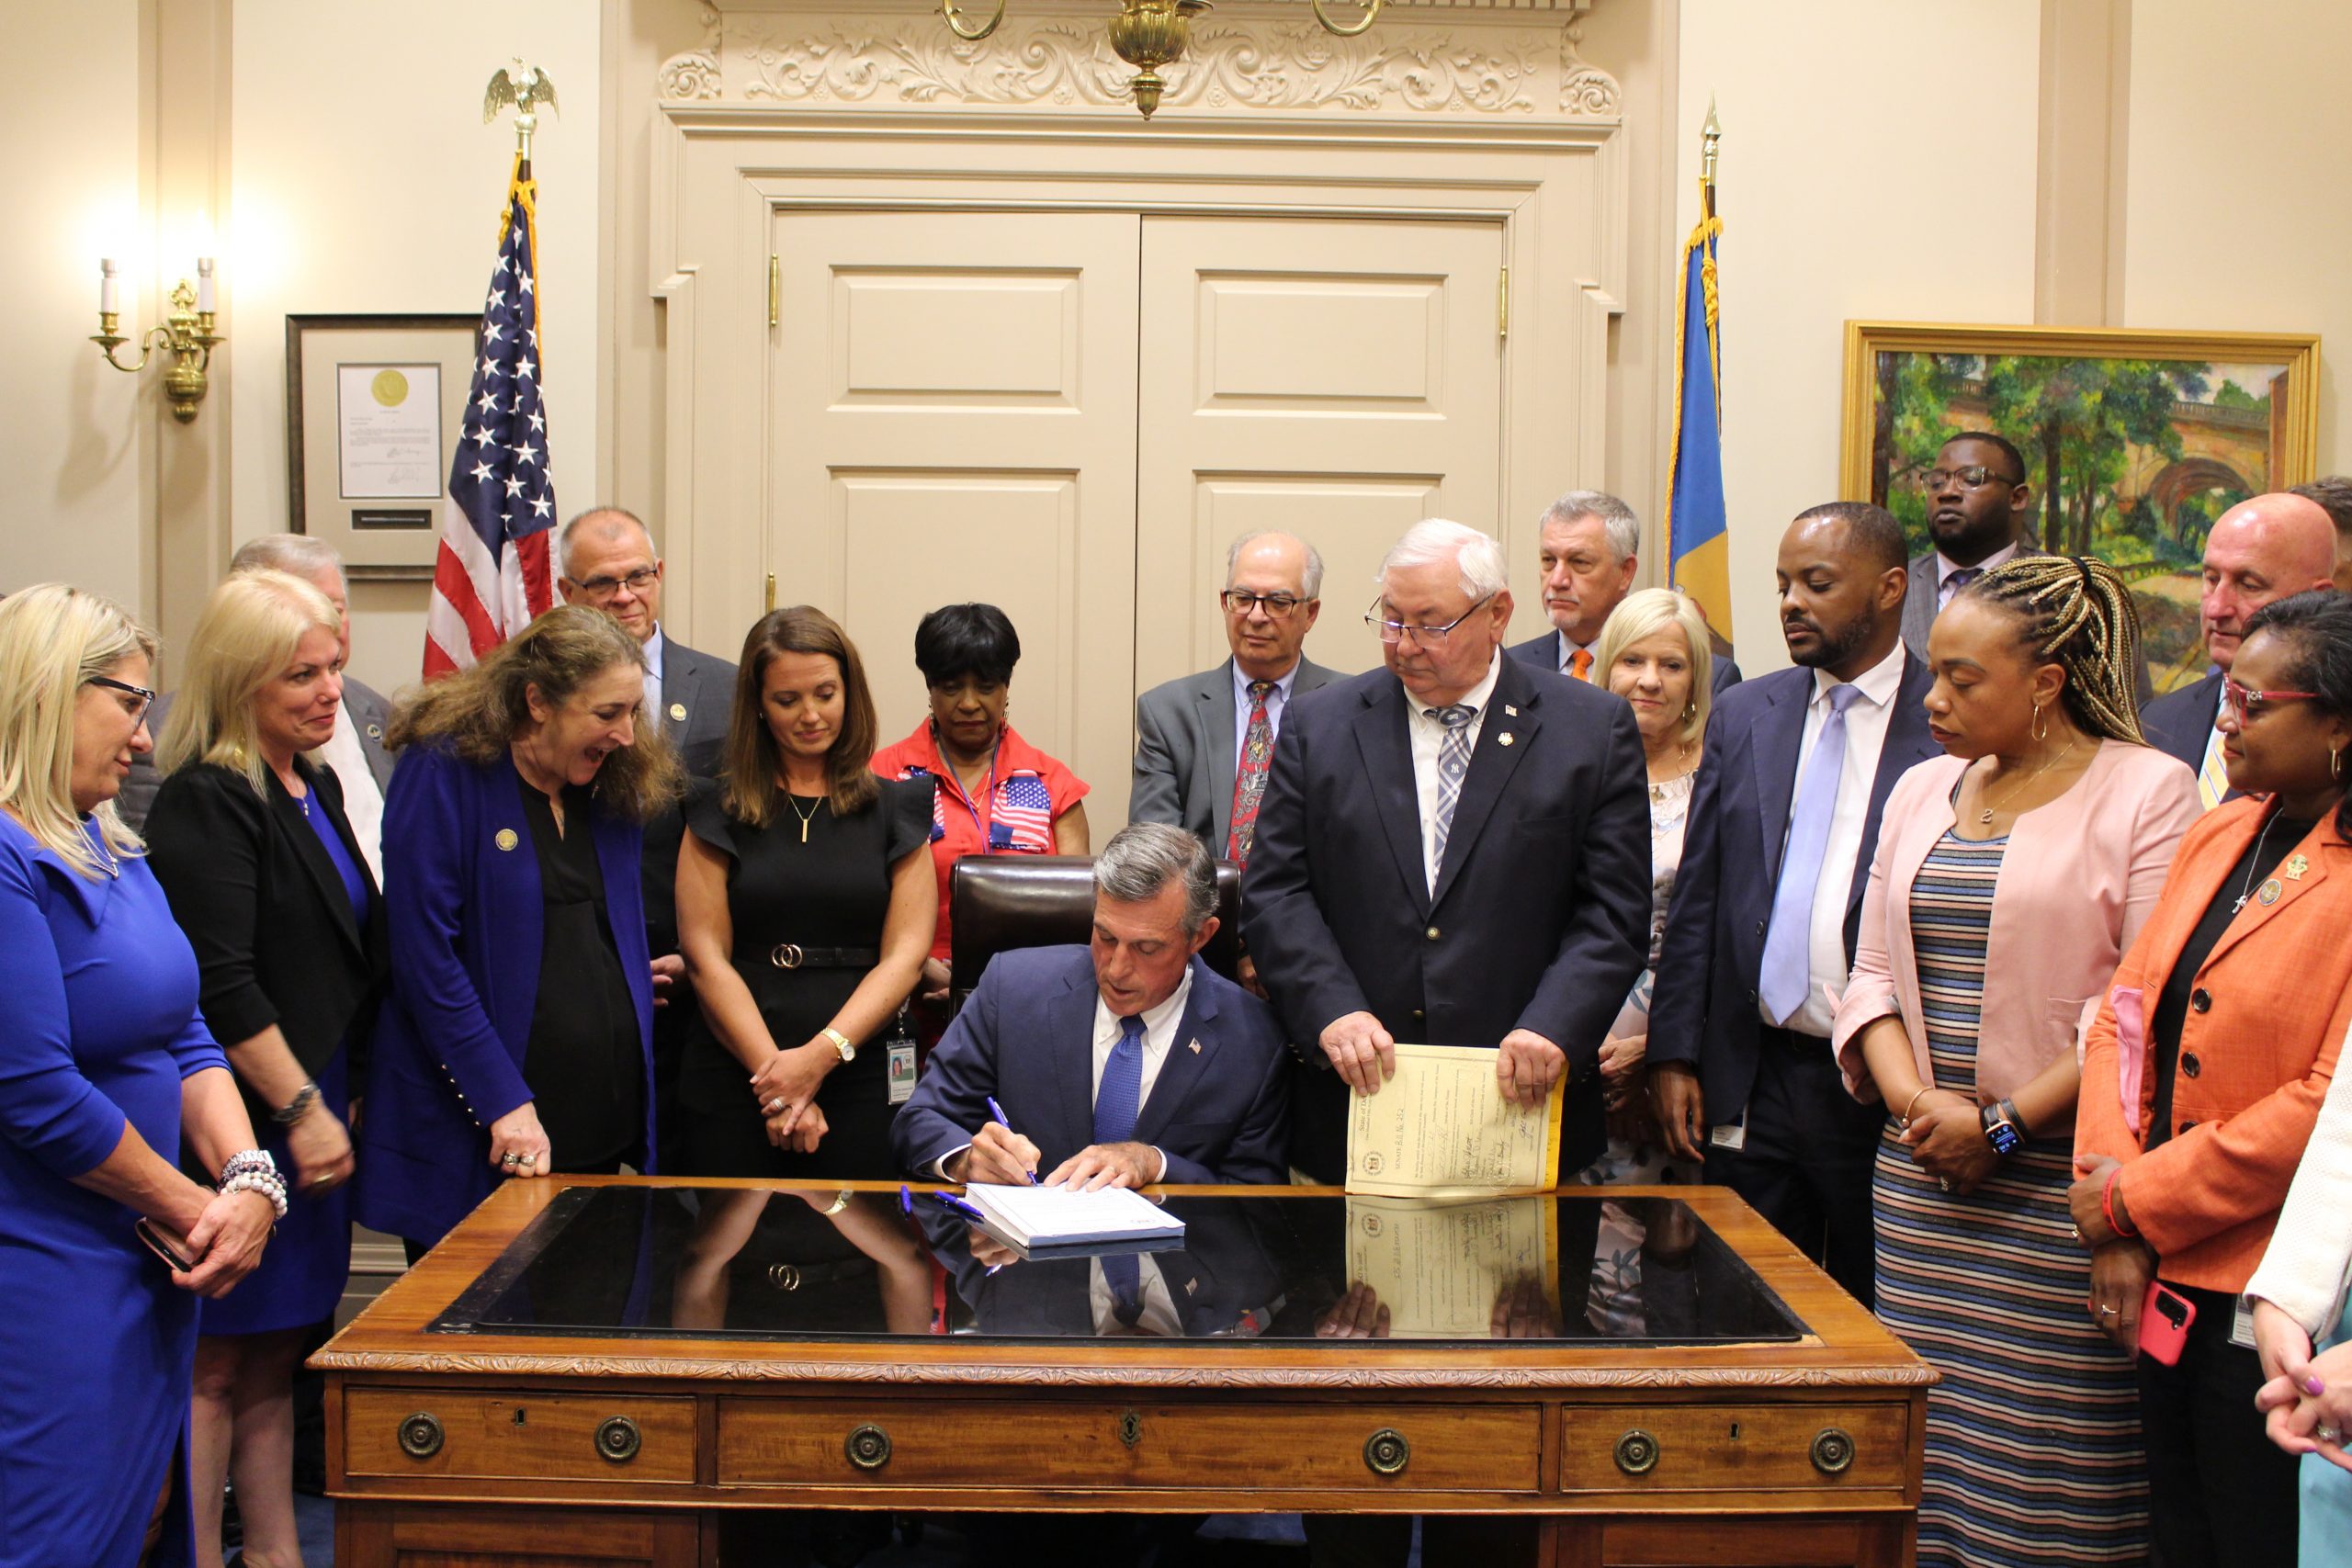 Governor Carney signs a bill at his desk while surrounded by members of the General assembly.